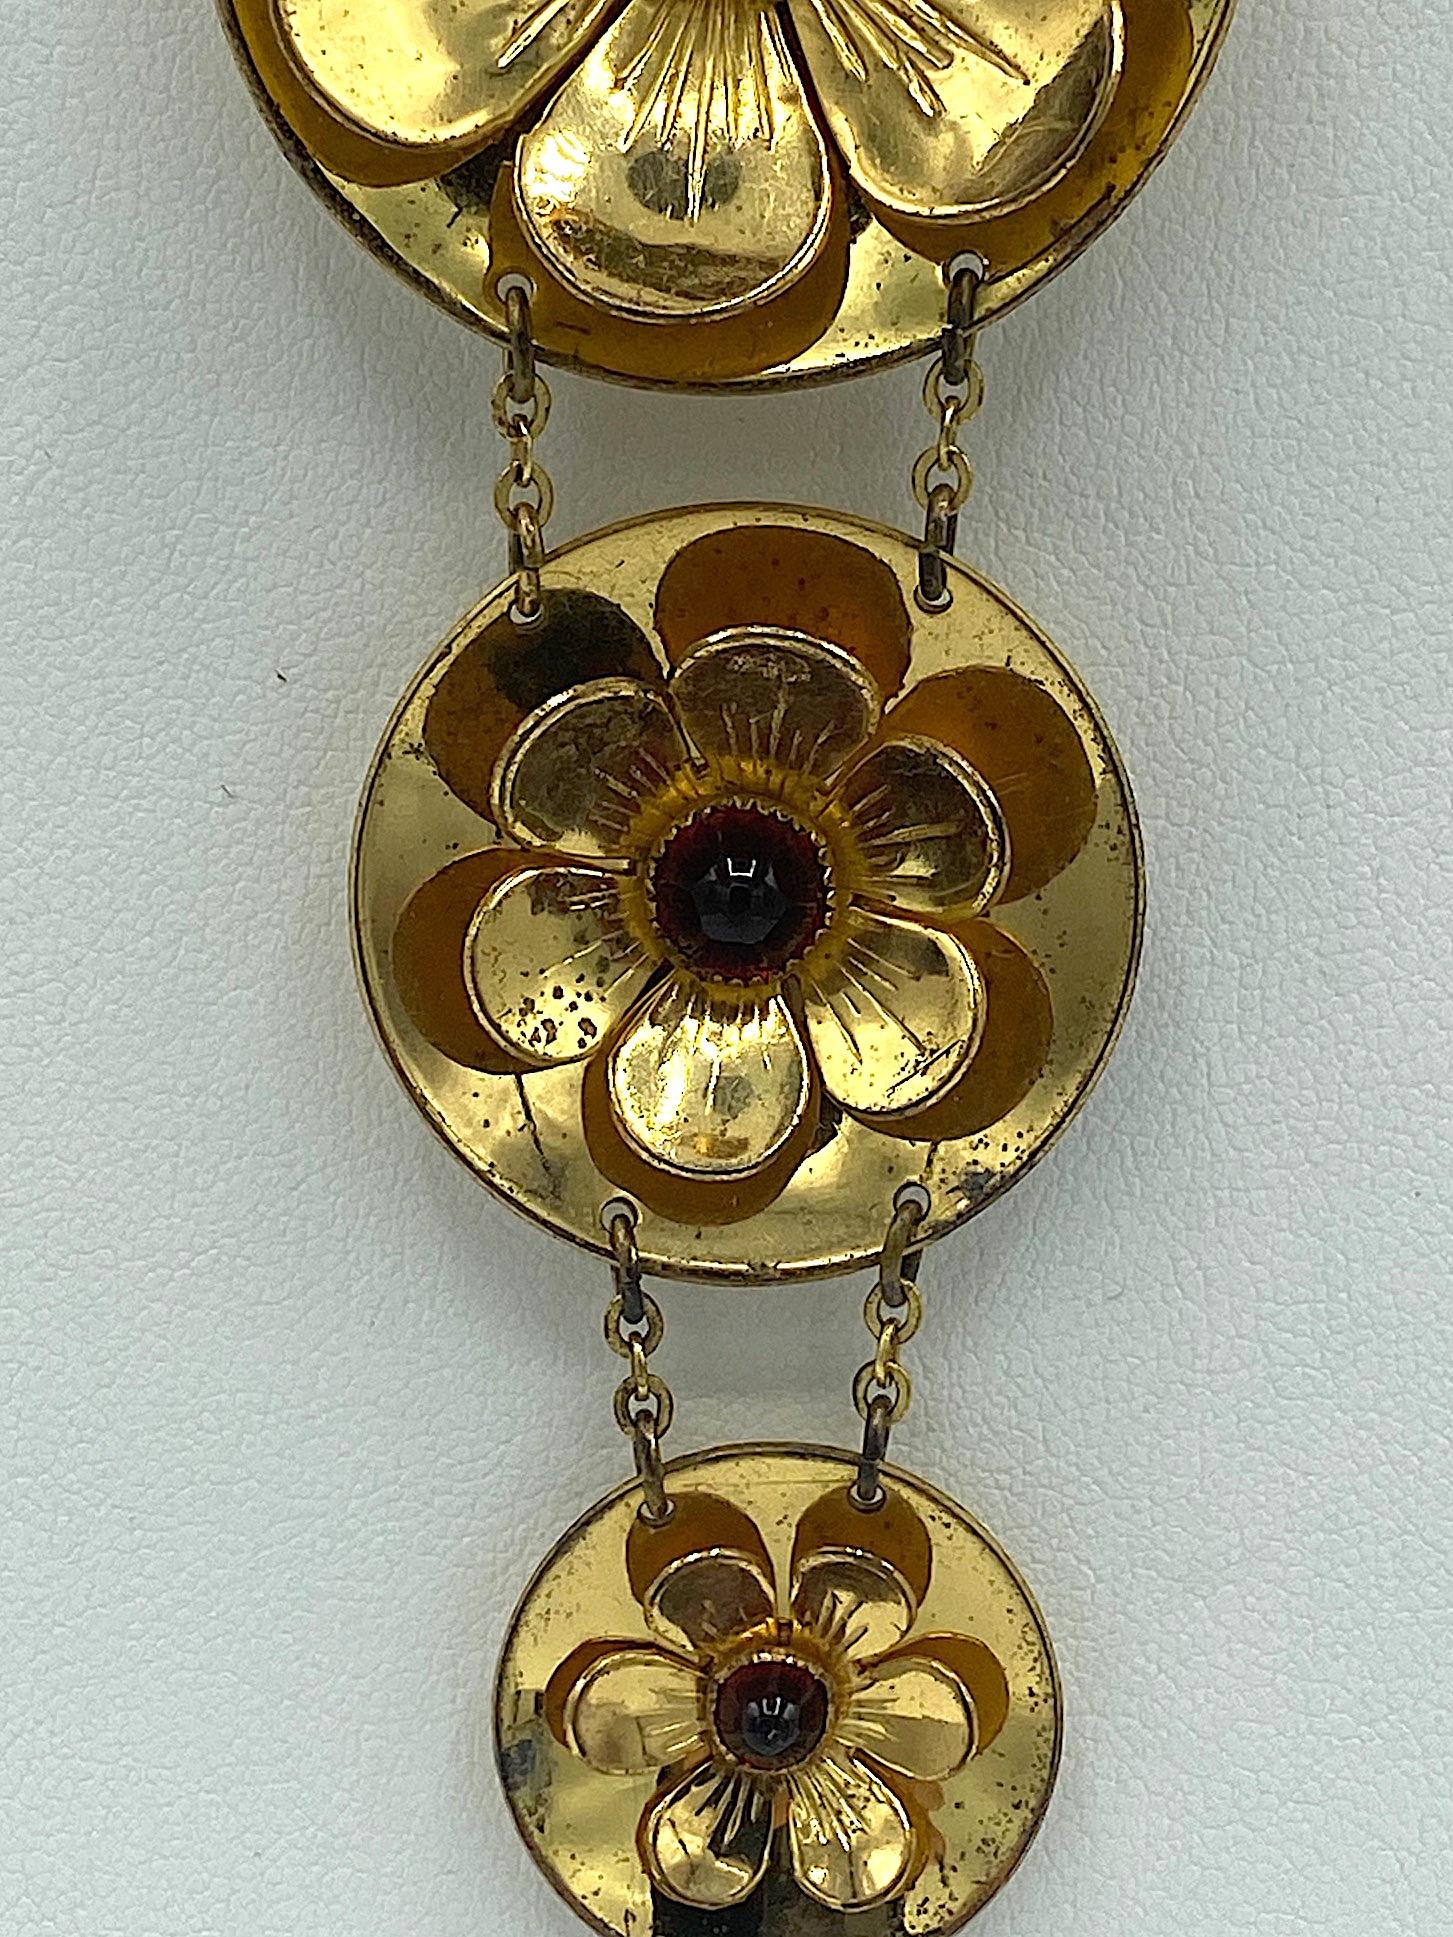 Women's Rare Early Monet Jewelers 1930s Flower Pendant Necklace